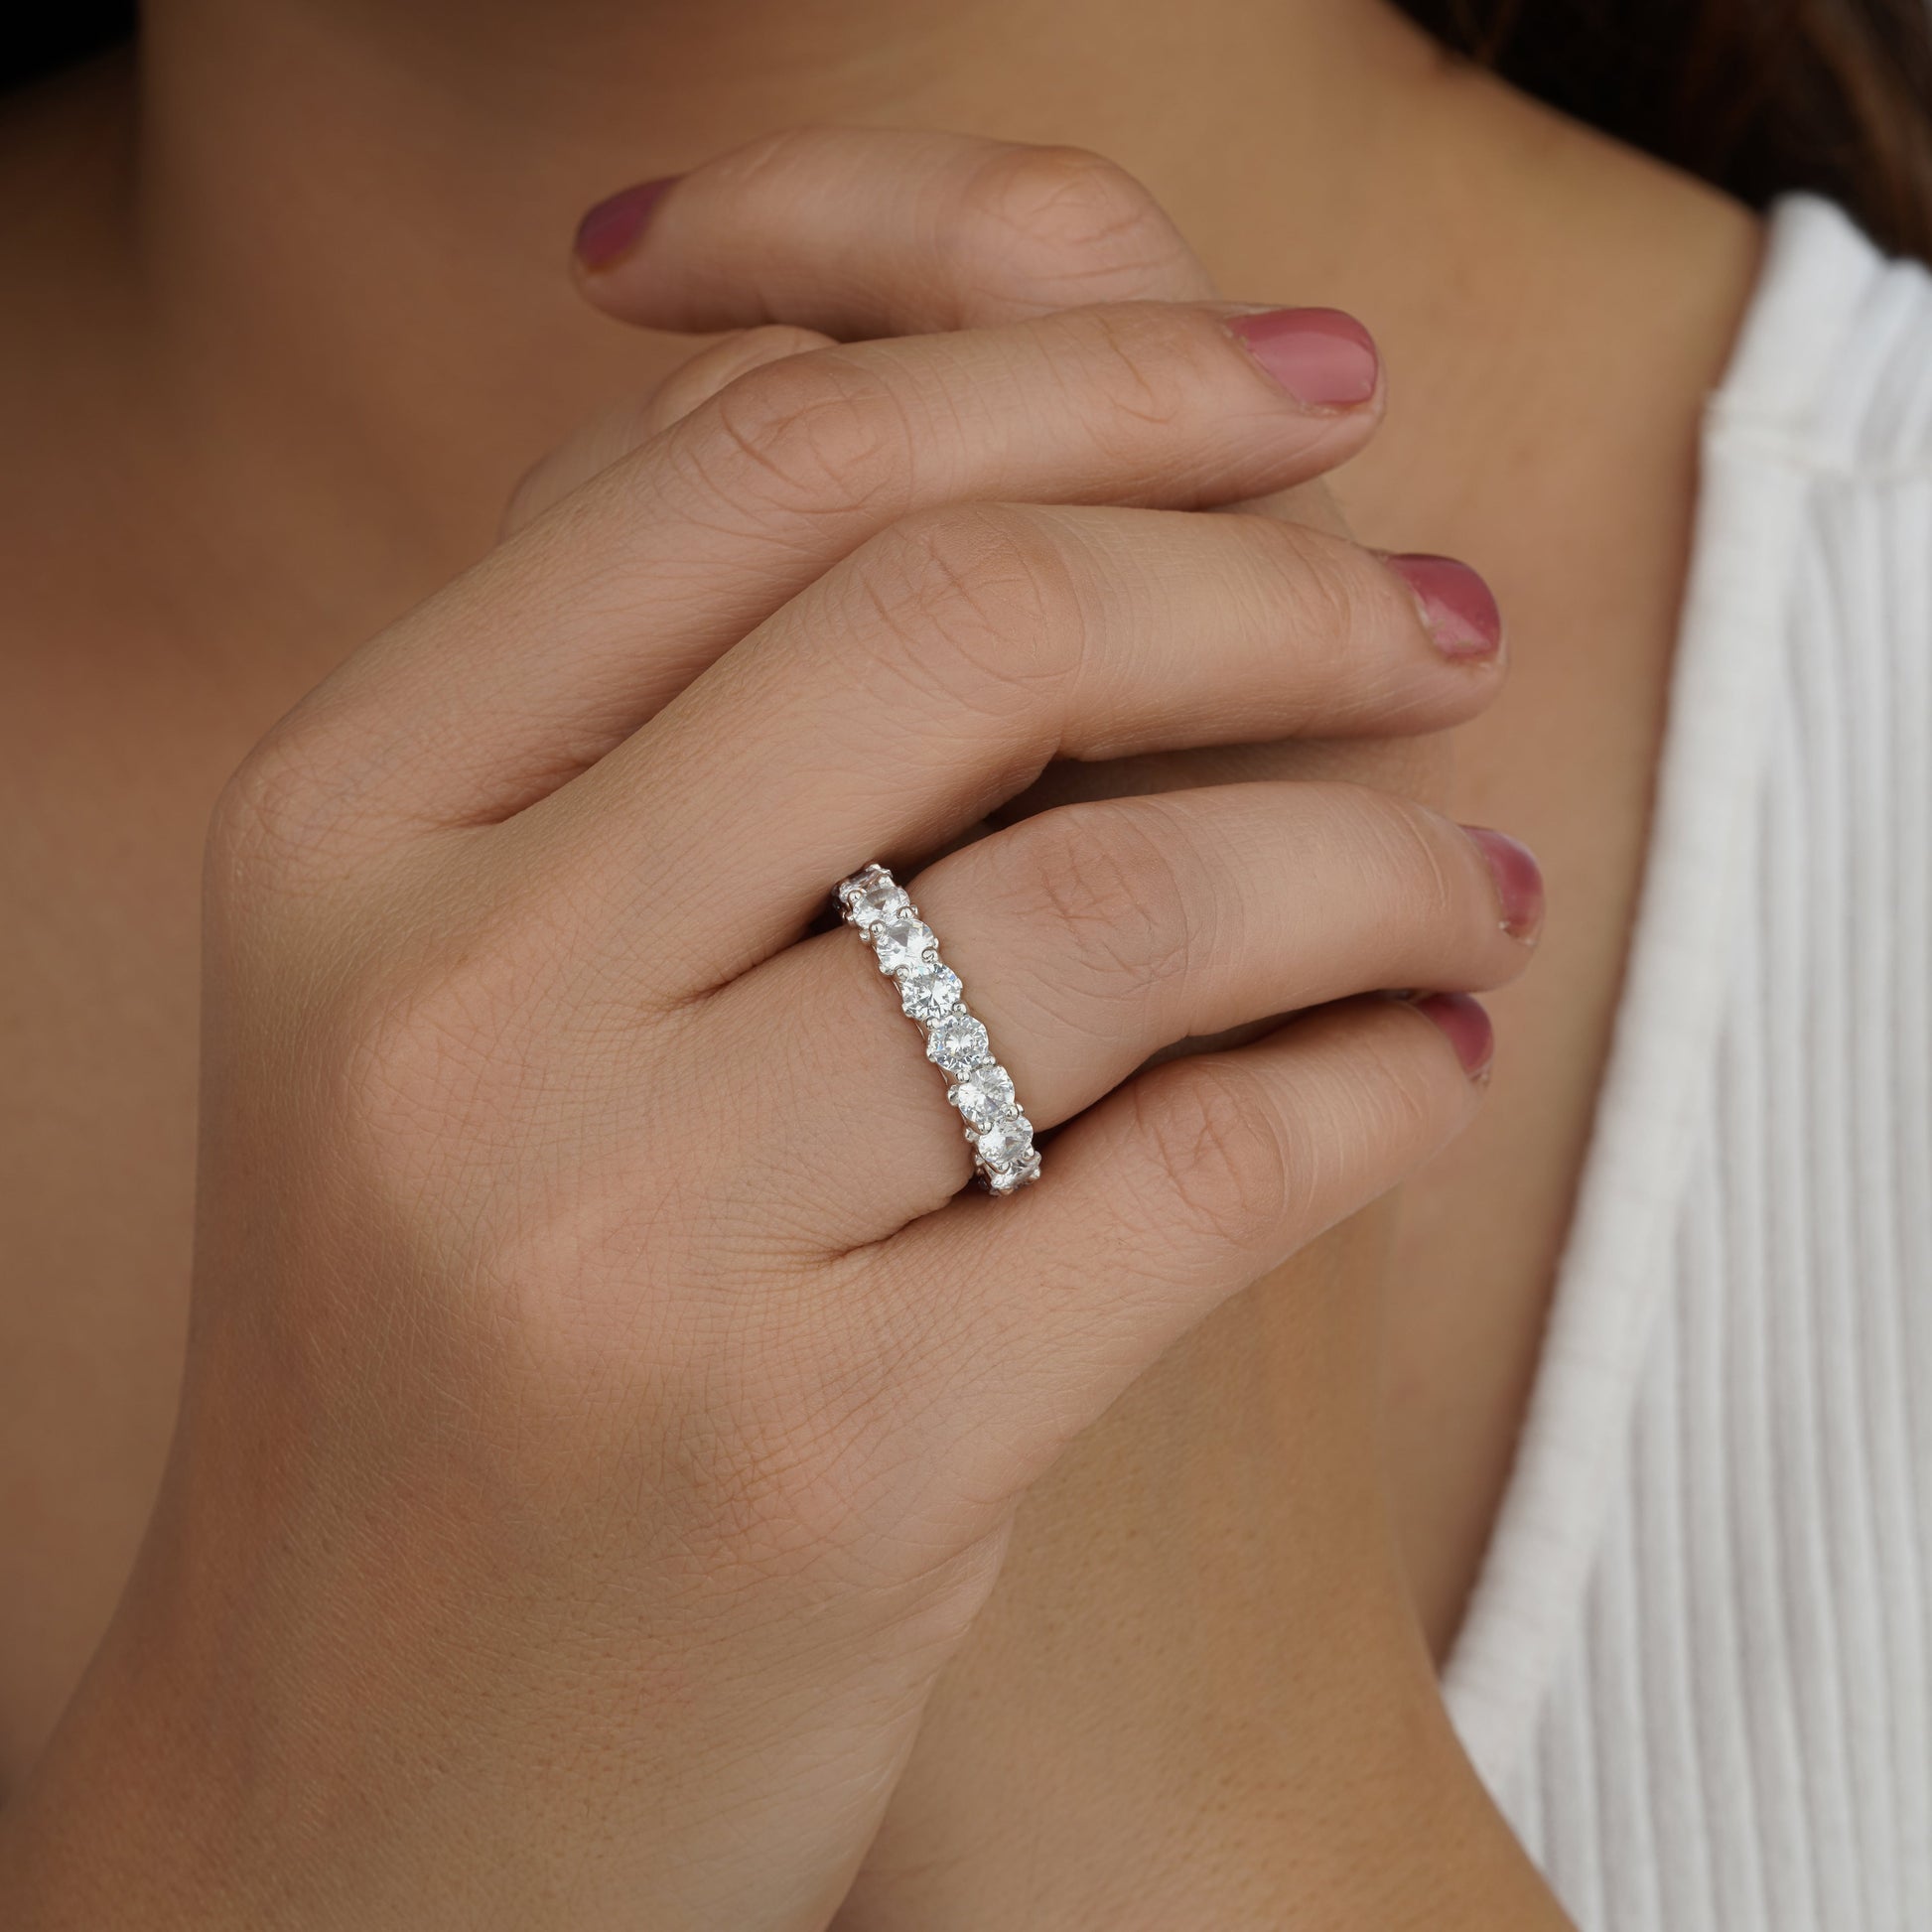 she is wearing moissanite band